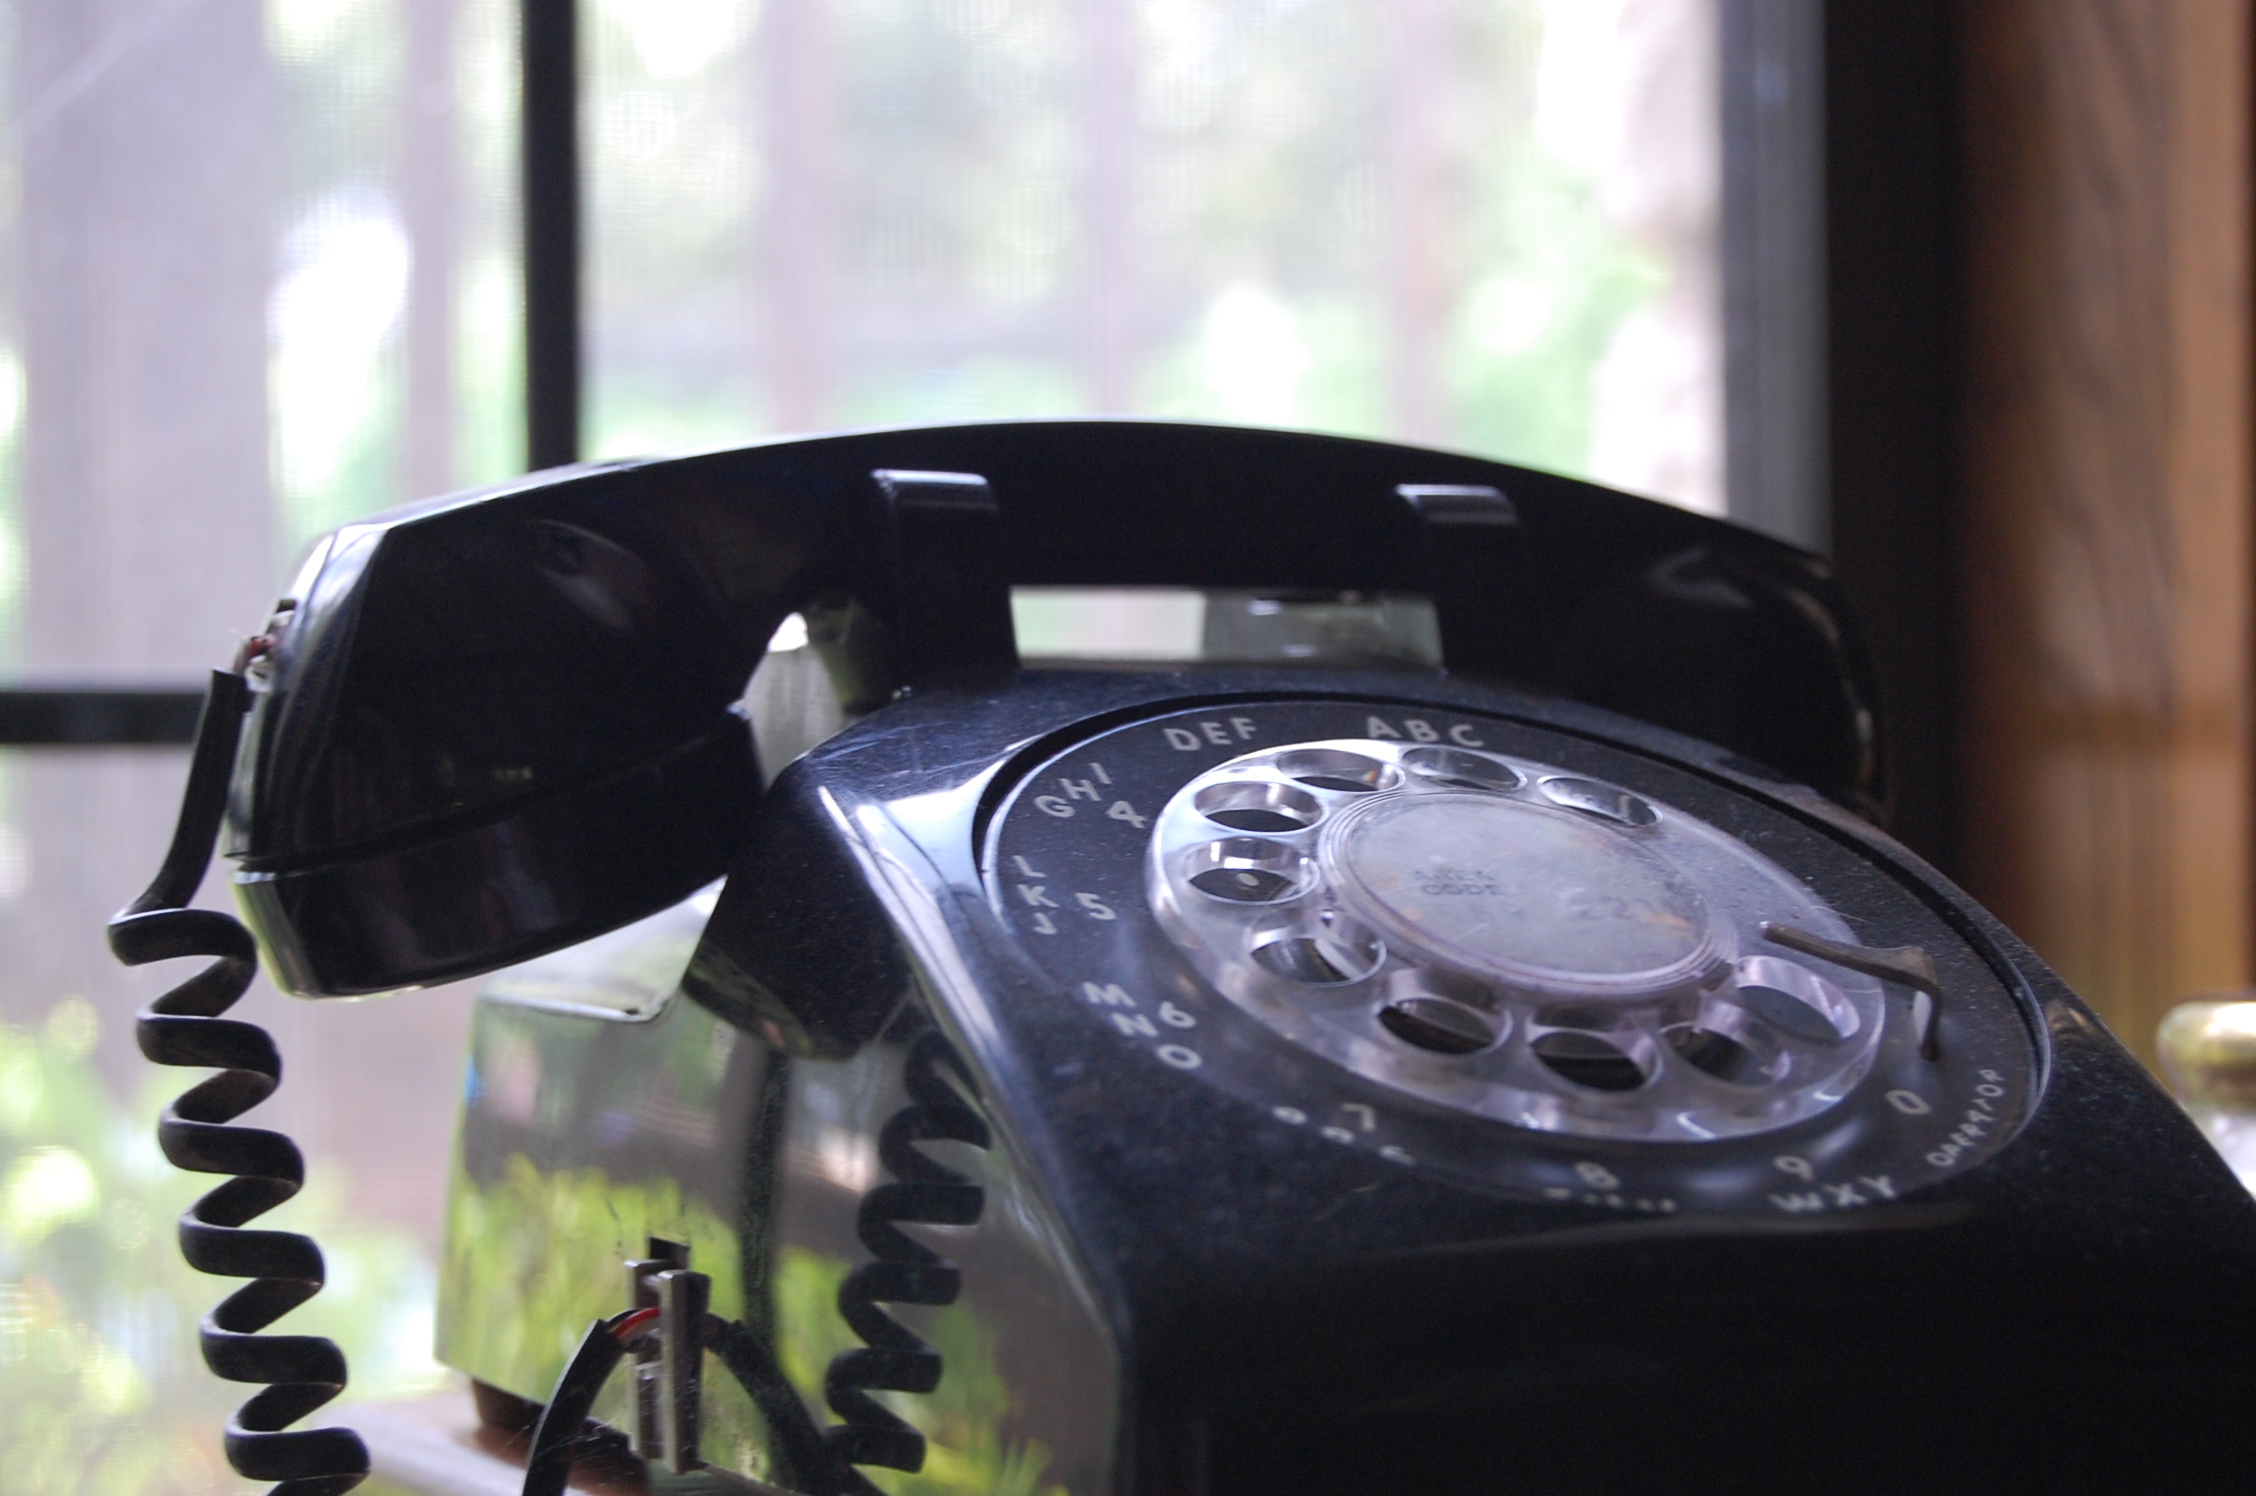 an old - fashioned phone stands in front of a window